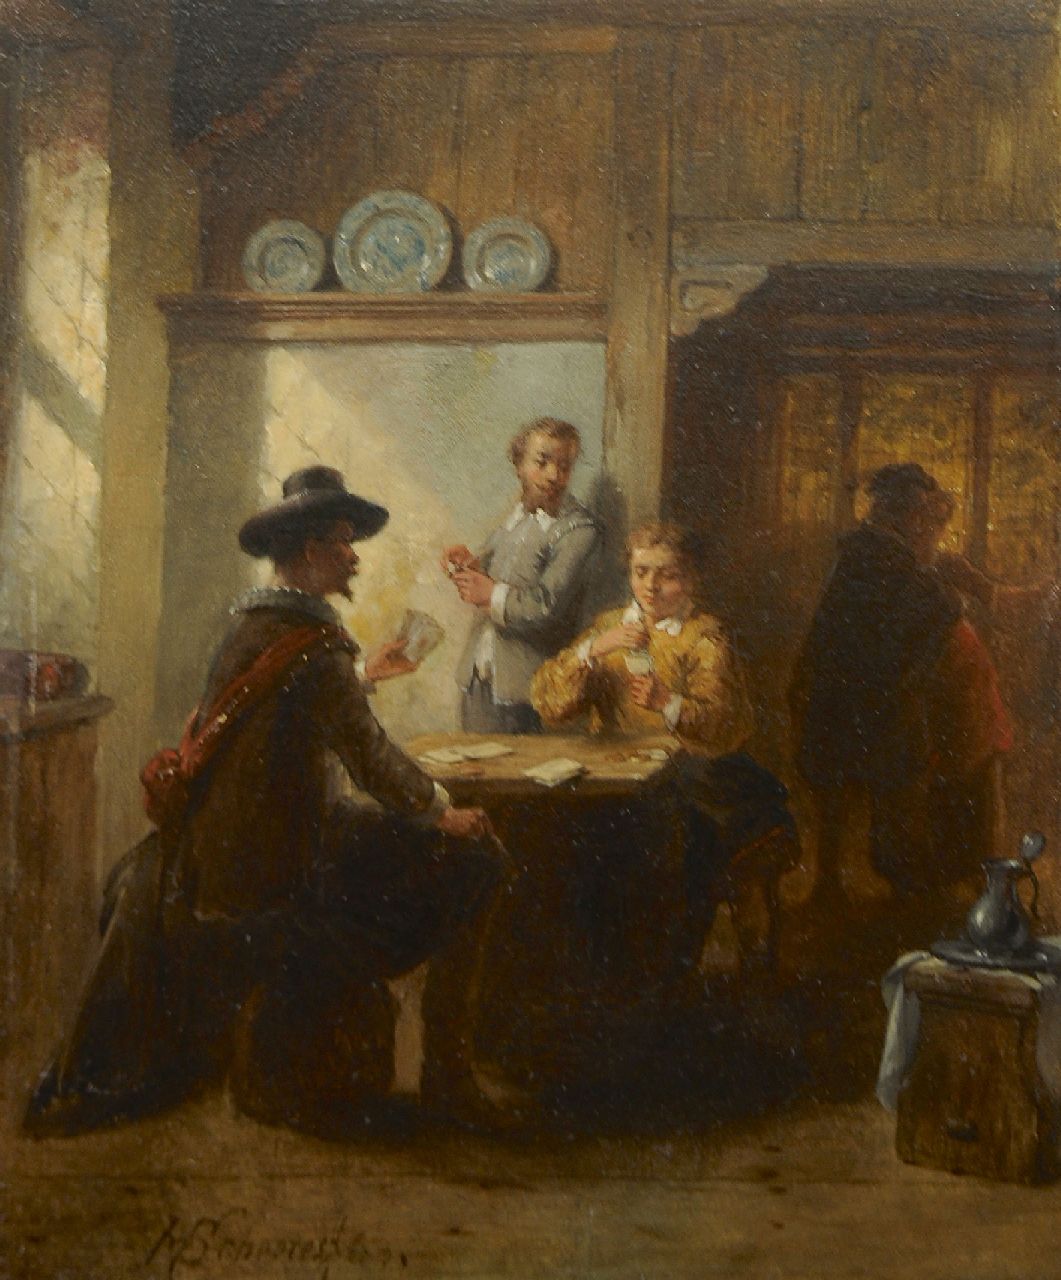 Scheeres H.J.  | Hendricus Johannes Scheeres, Card players and a courtship in an Old Dutch interior, oil on panel 18.6 x 15.1 cm, signed l.l. and dated '63